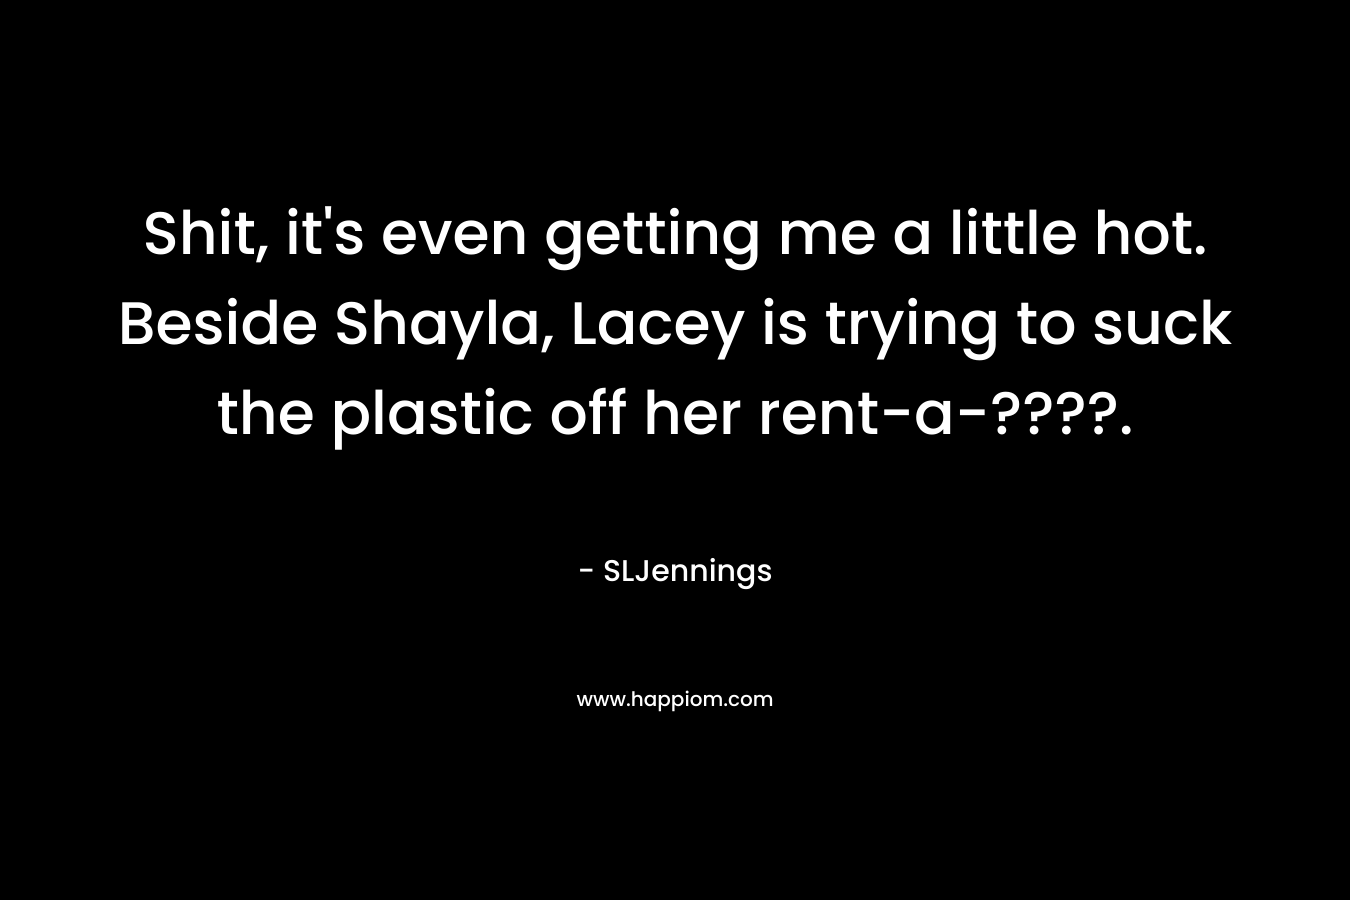 Shit, it’s even getting me a little hot. Beside Shayla, Lacey is trying to suck the plastic off her rent-a-????. – SLJennings